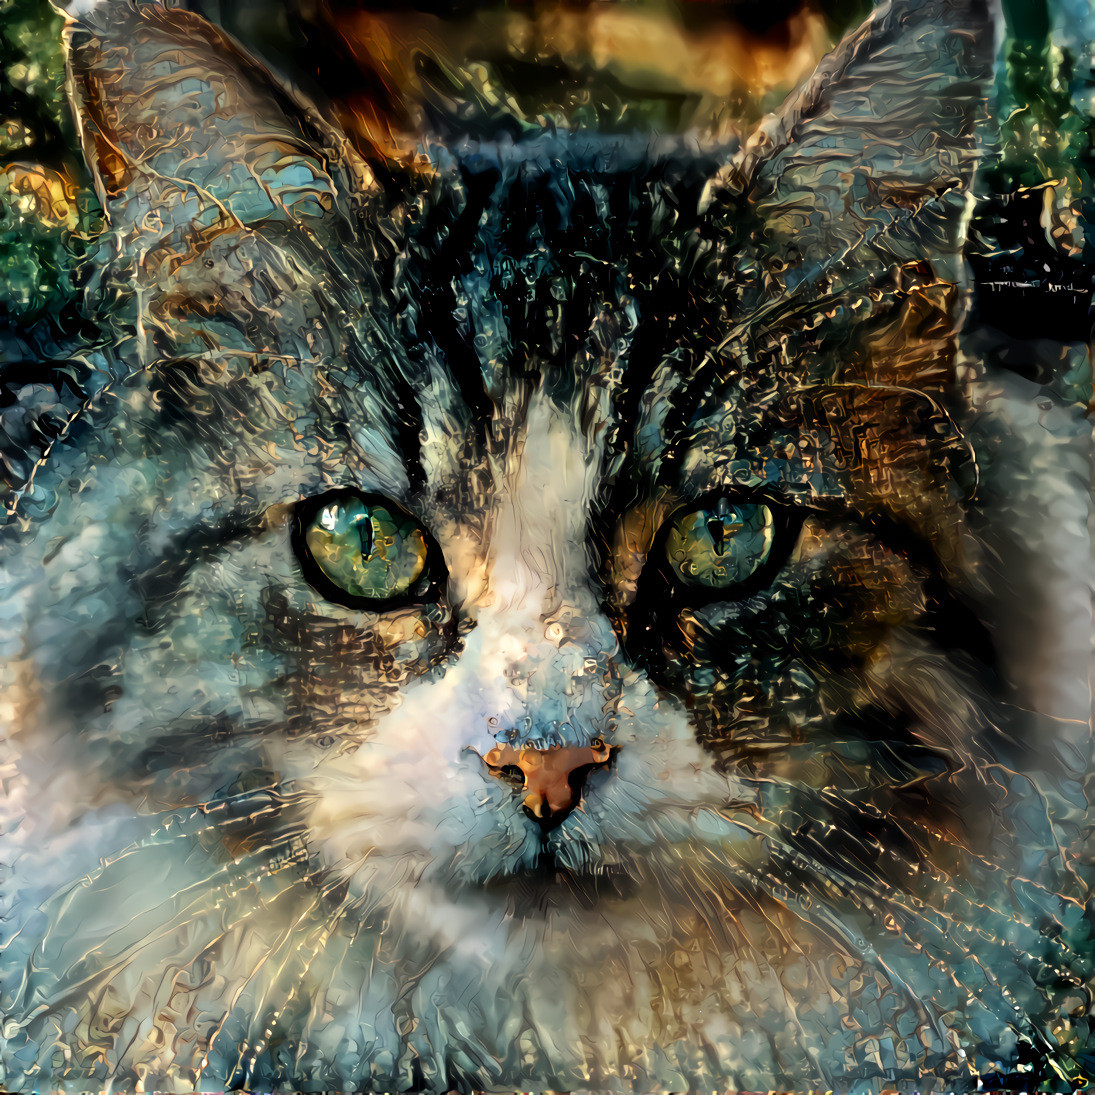 Image of cat, created by neural-network that called "This Cat Does Not Exist", edited with DDG.